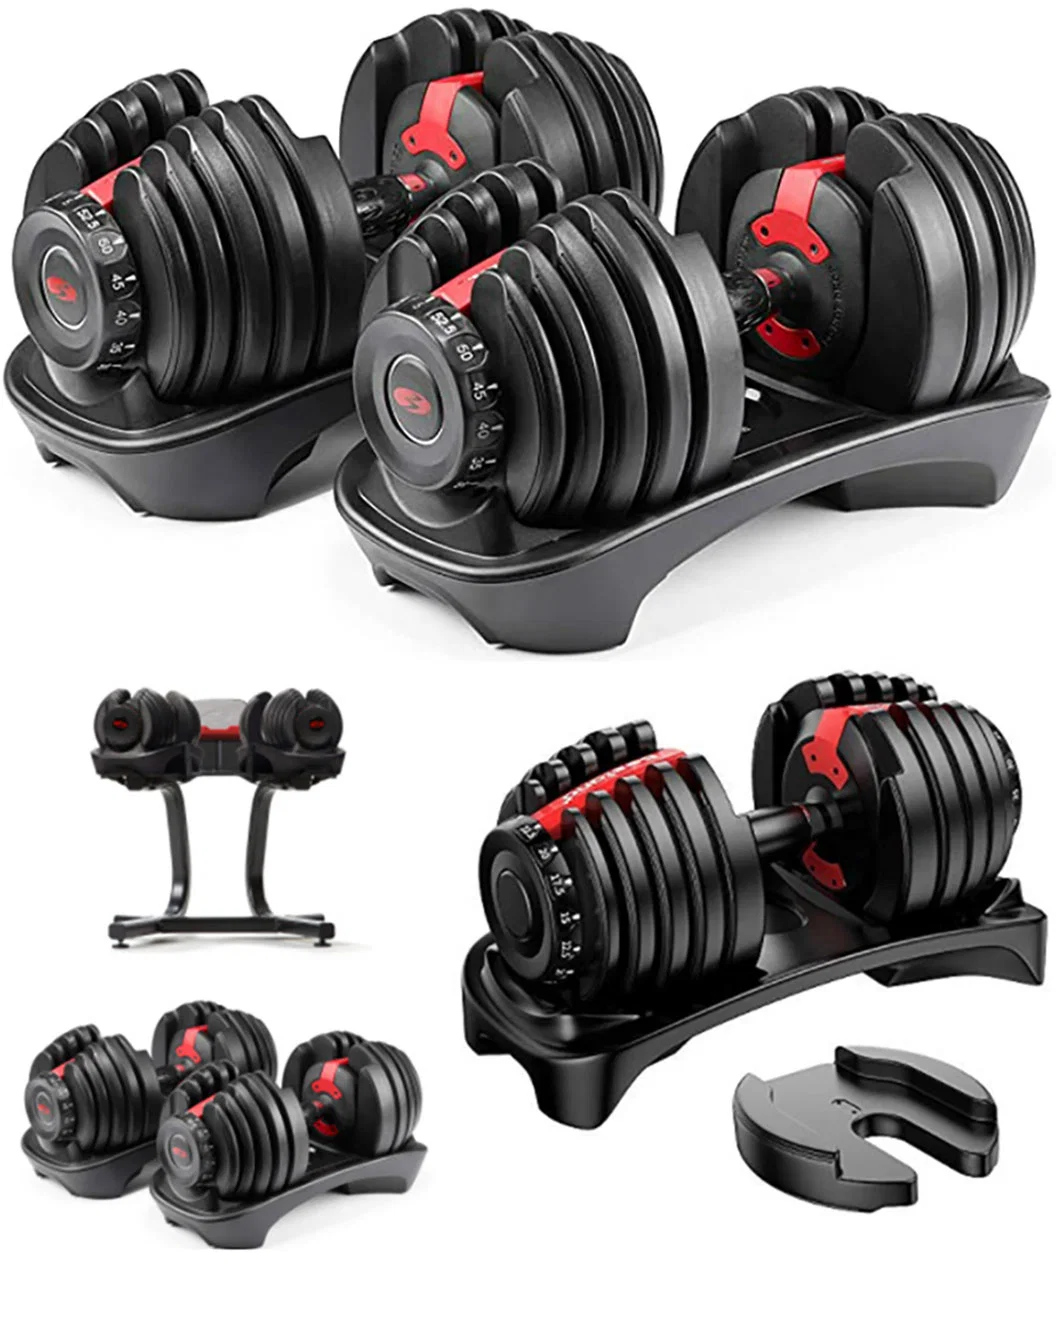 Weight Lifting Fitness 24kg Adjustable Dumbbell Set for Home Exercise and Fitness